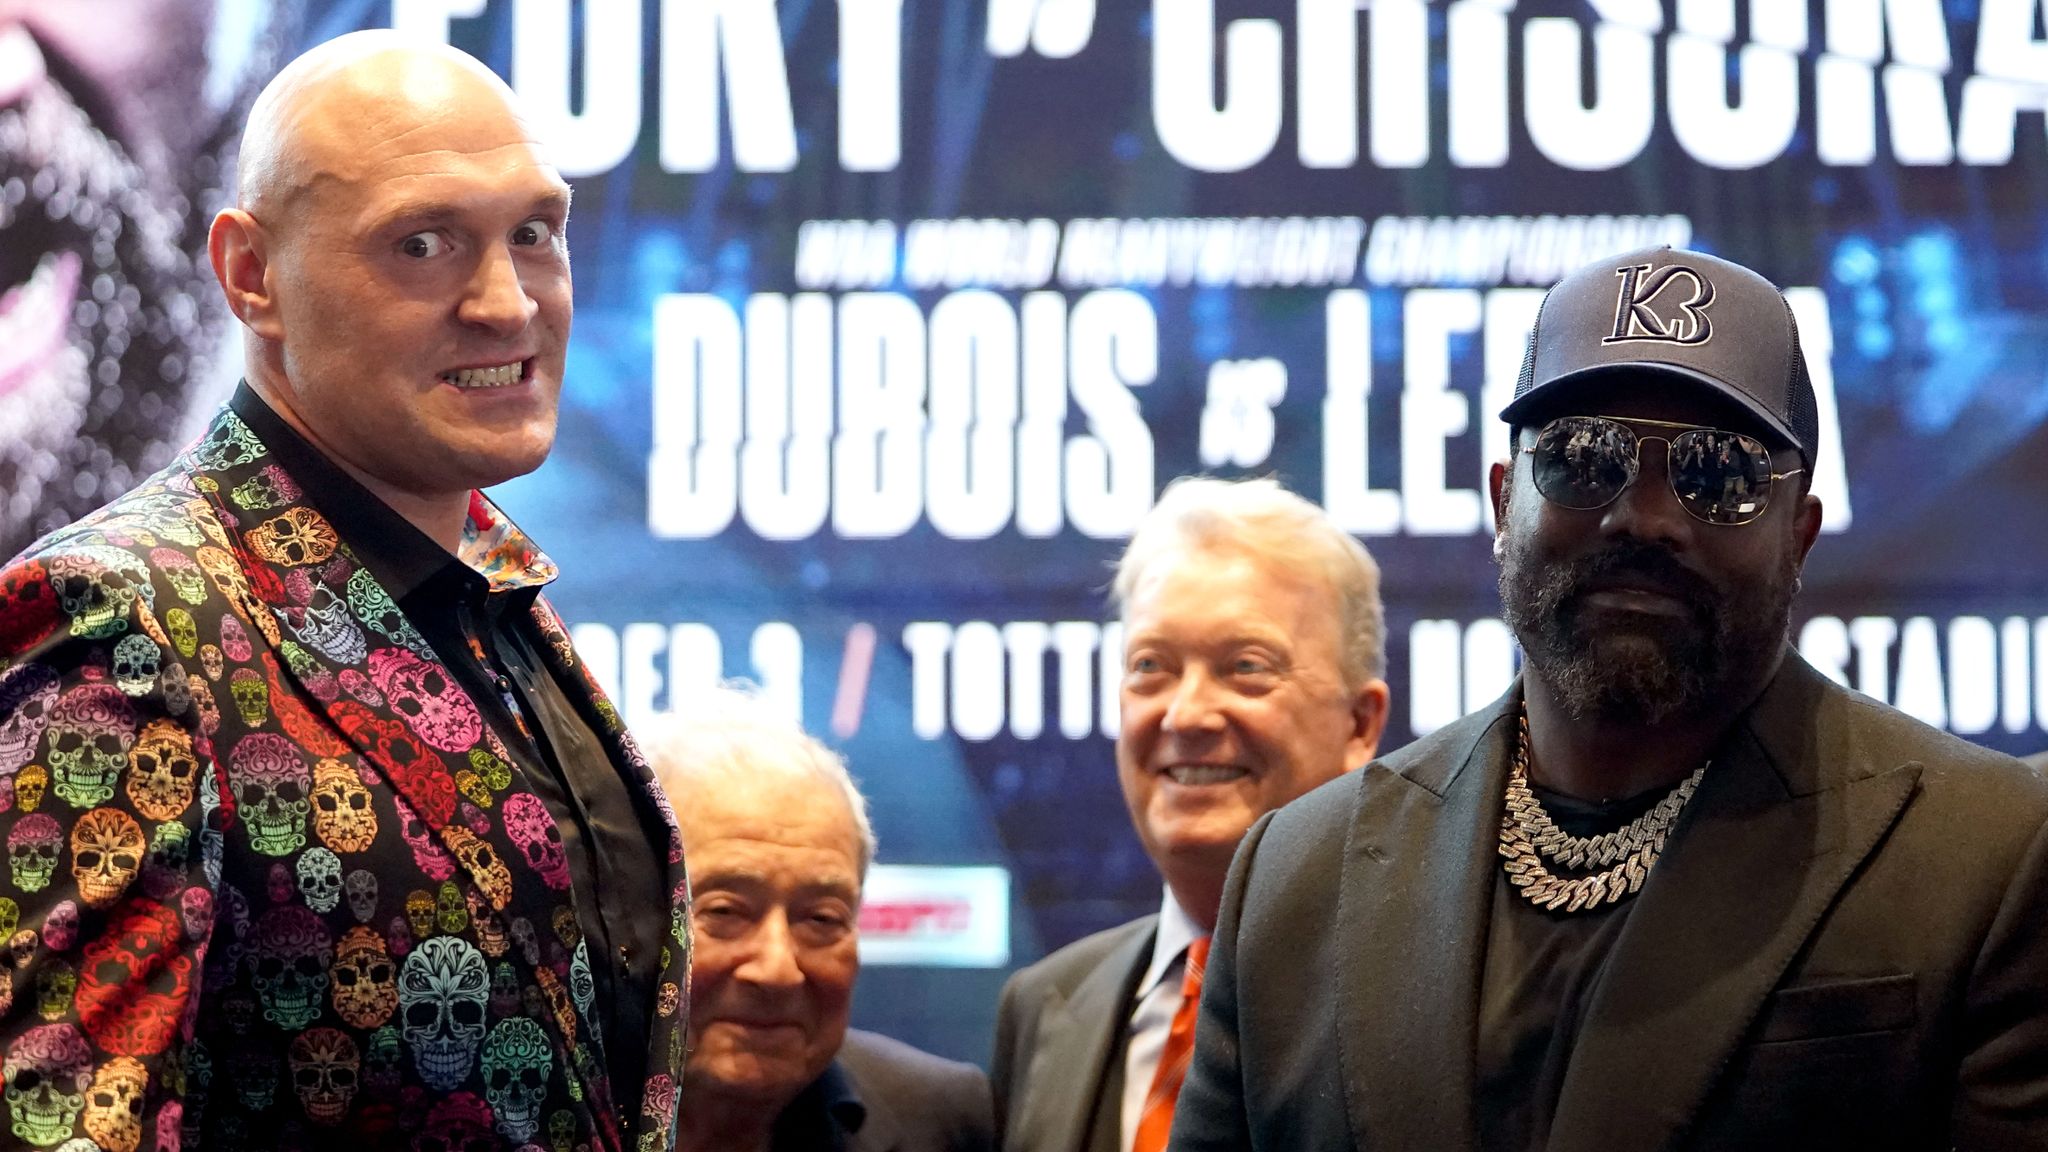 Tyson Fury goes head to head with Derek Chisora at first press conference for trilogy fight on December 3 Boxing News Sky Sports